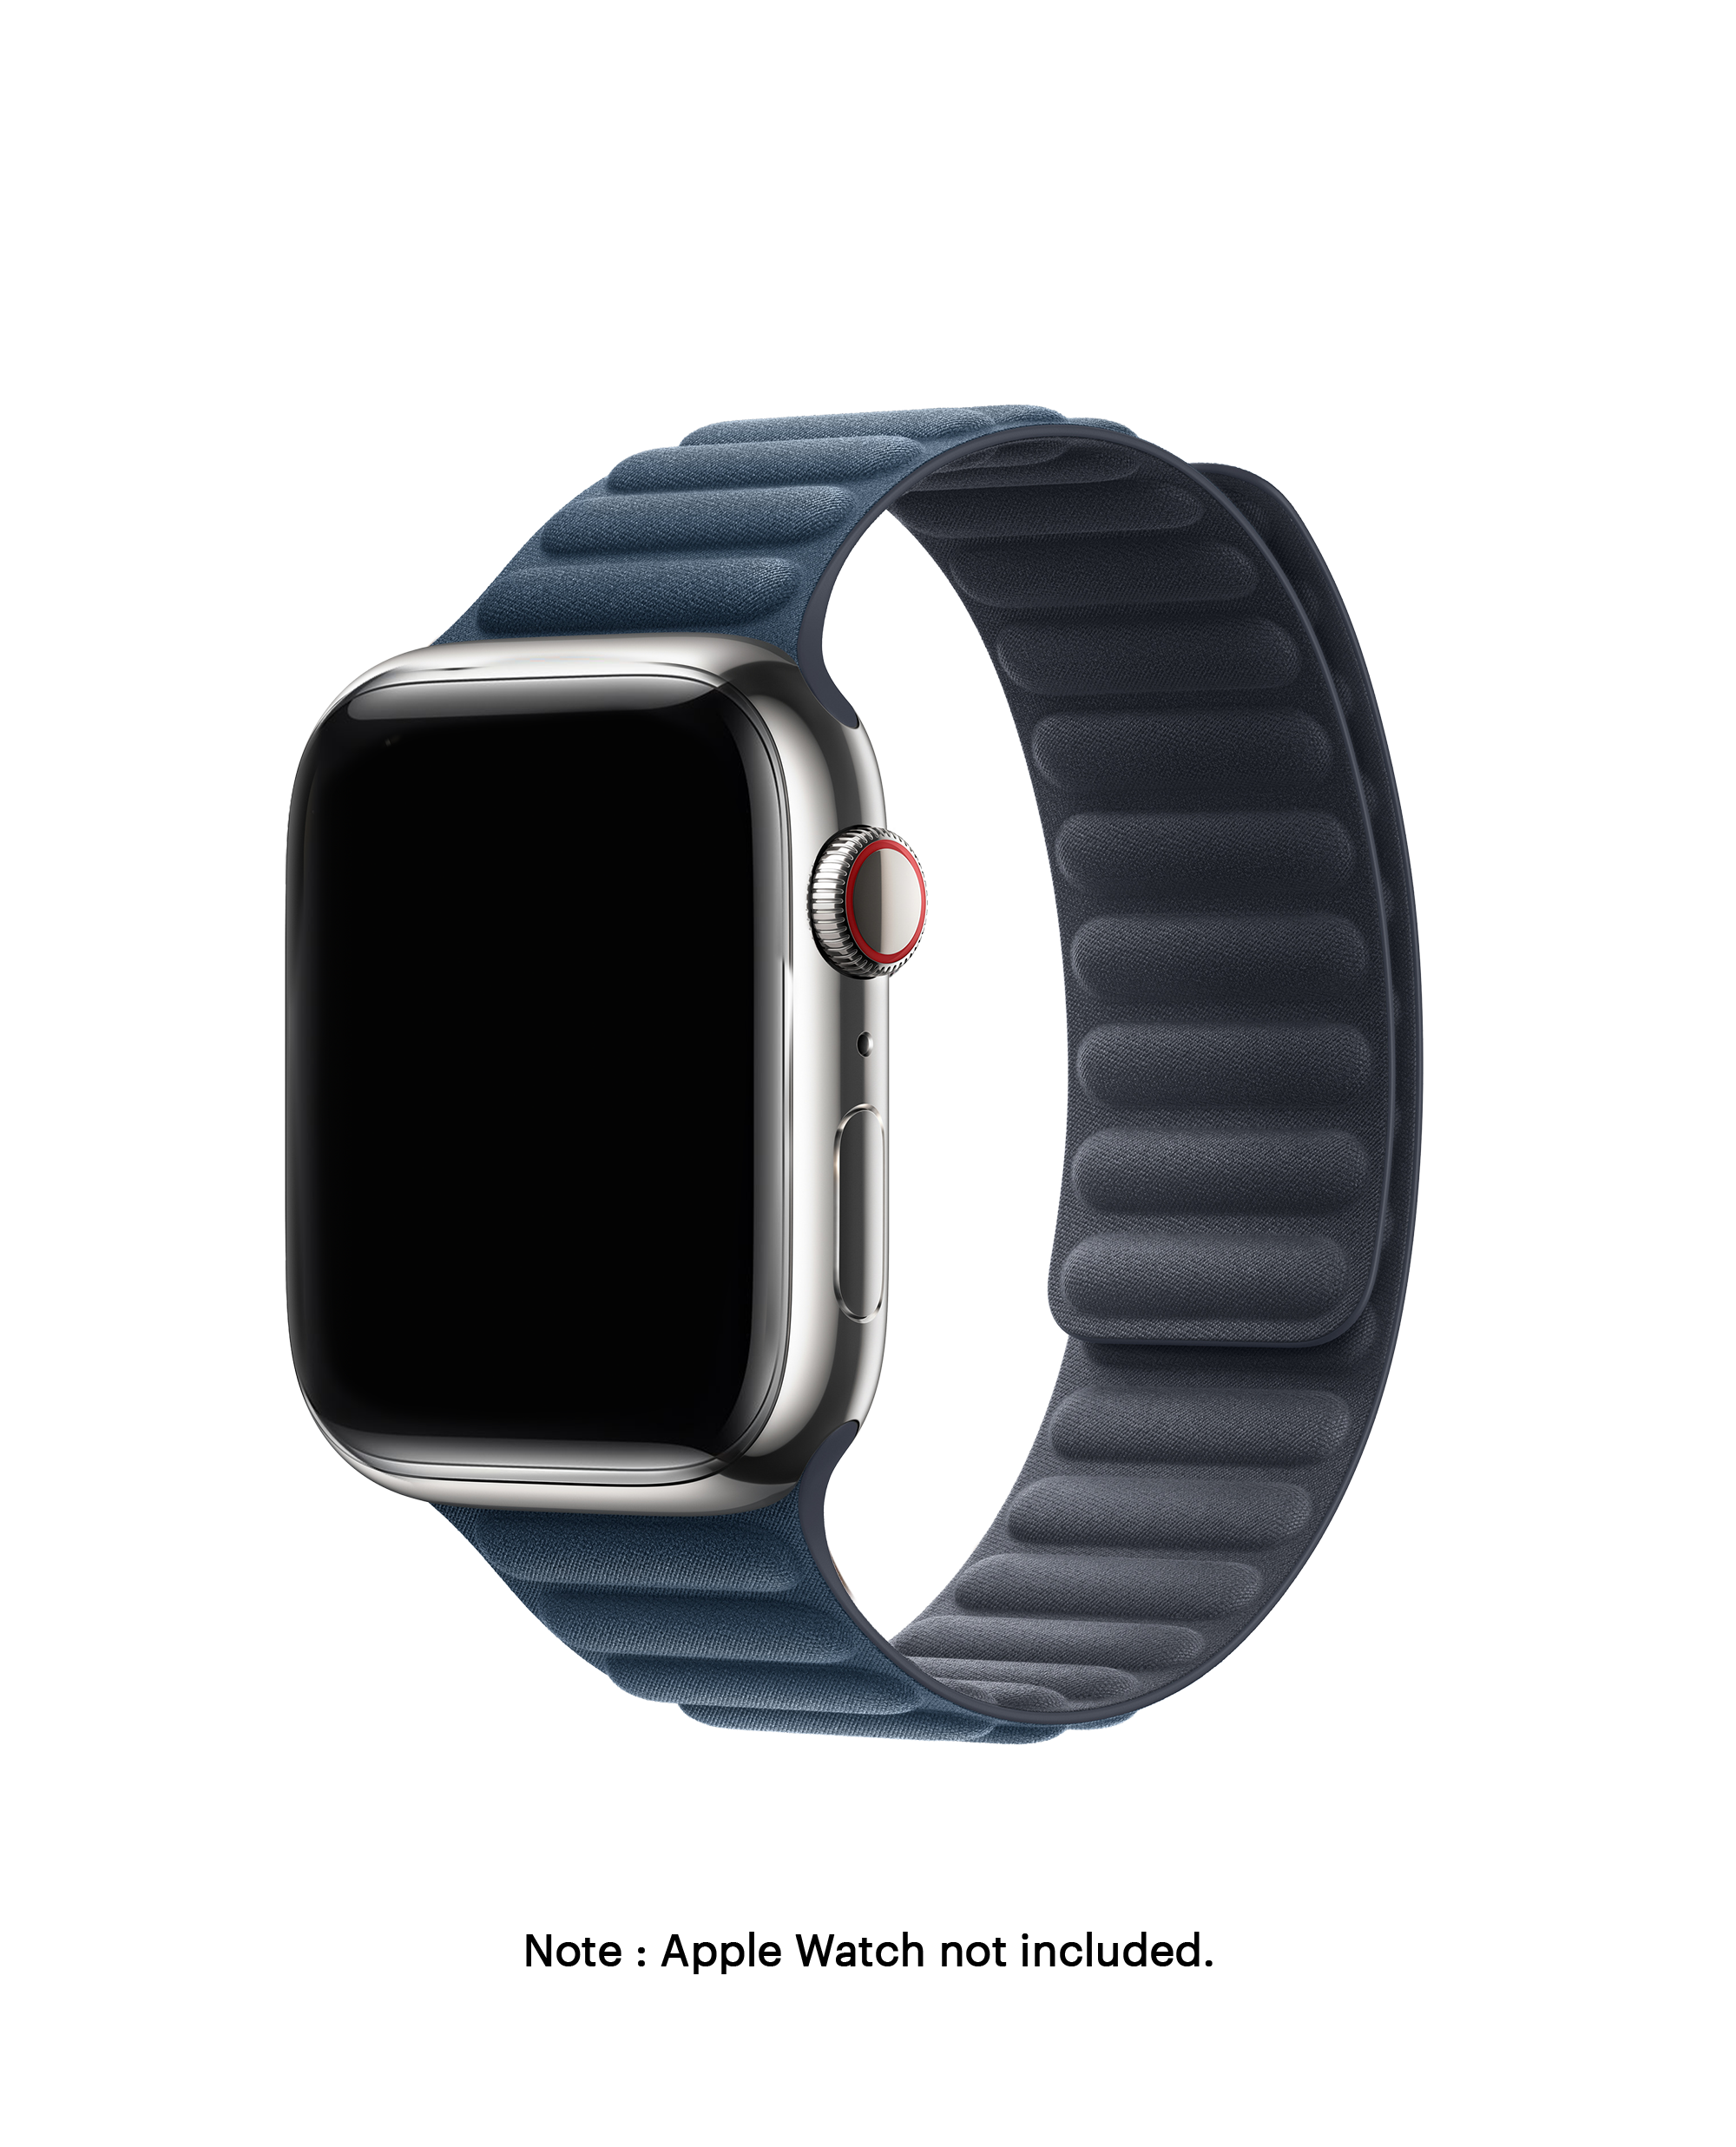 Toto 42mm/44mm Stainless Steel Band Compatible with Apple Watch Series 5/  Sereis 4/ Series 3/ Series 2/ Series 1, 42mm / 44mm, Series 3/2/1 42mm  iWatch Bracelet Wristbands Strap (Jet Black) WATCH